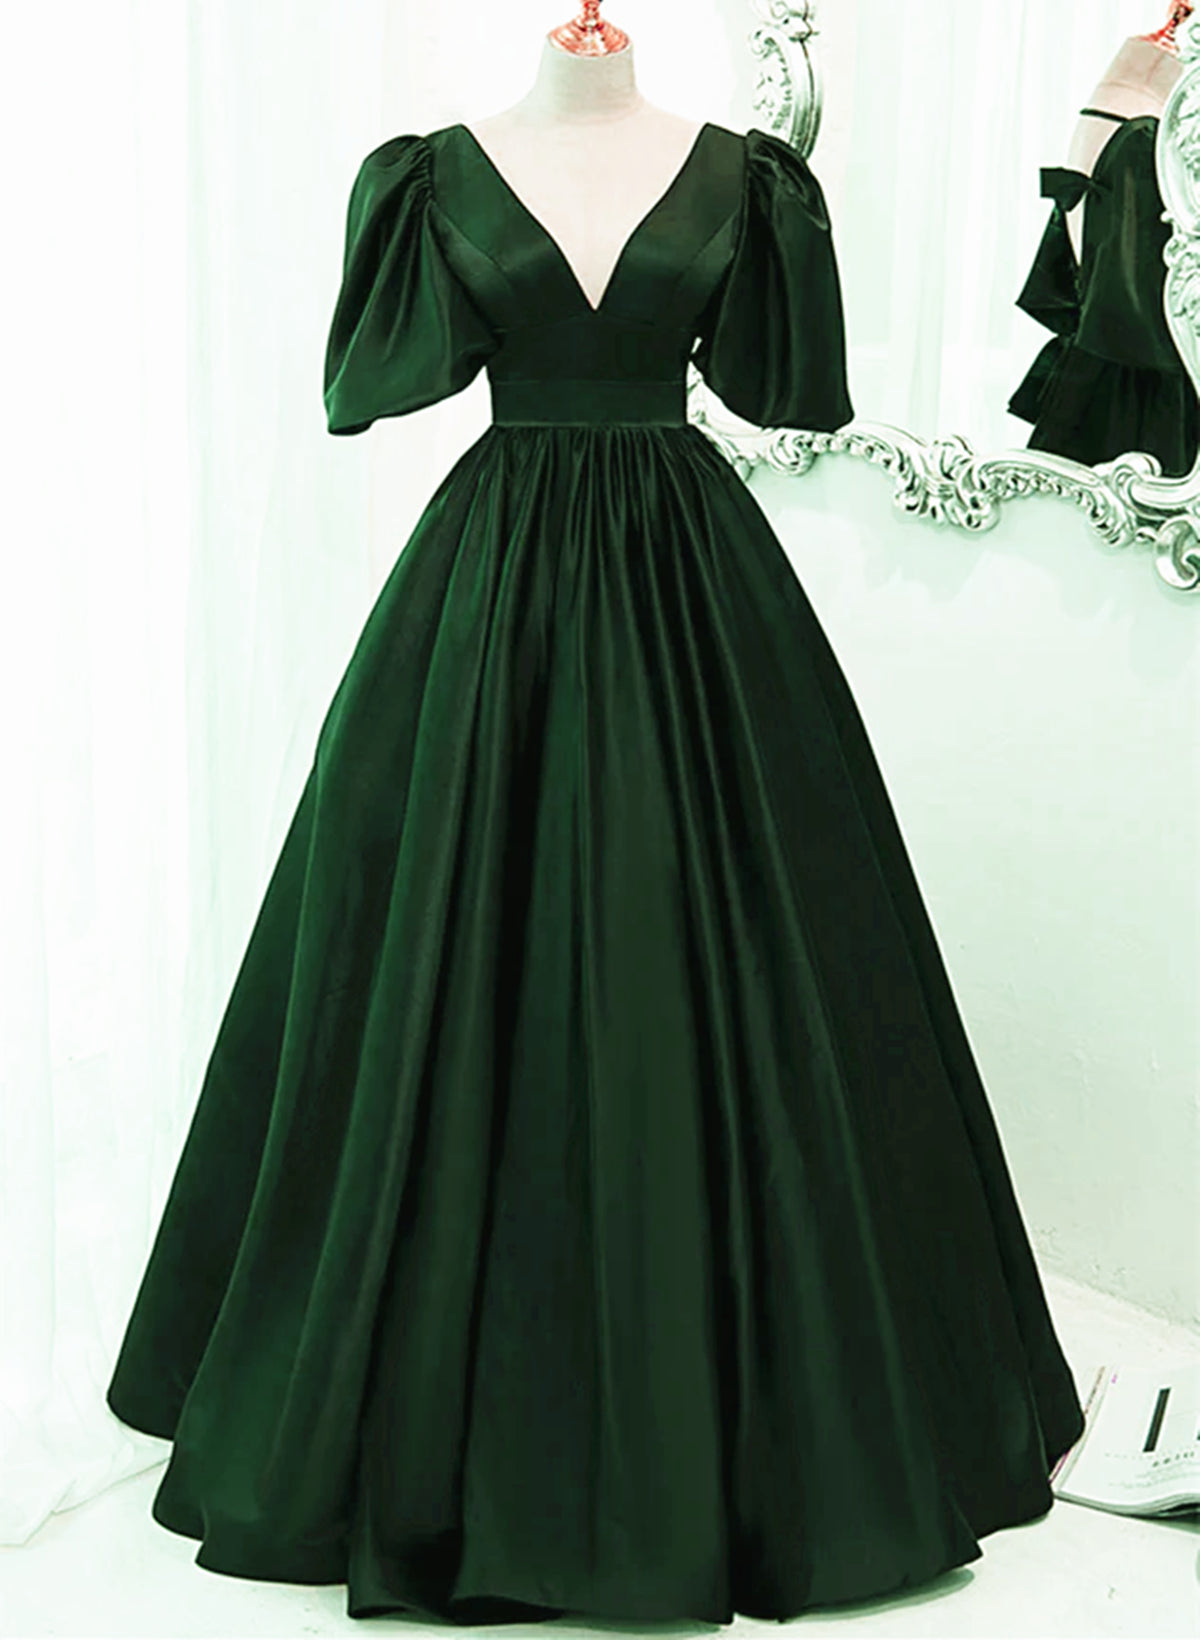 Green Satin Short Sleeves Long Party Dress Outfits For Girls, Green Floor Length Evening Dress Outfits For Women Prom Dress